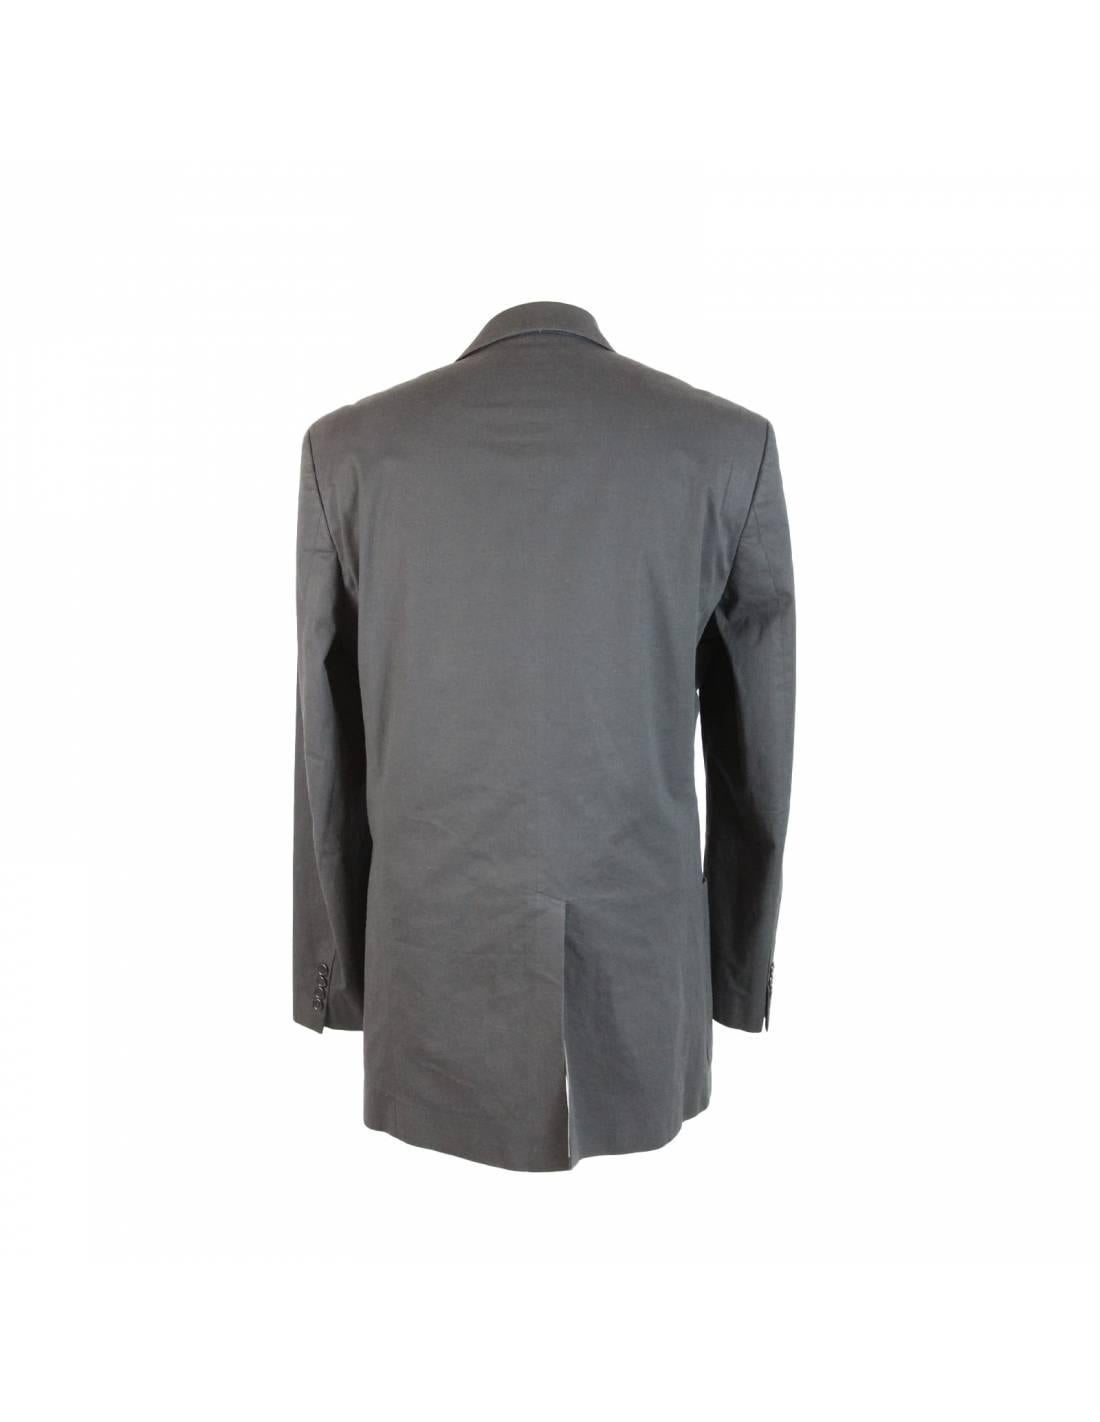 Hugo Boss Gray Cotton Jacket In Excellent Condition For Sale In Brindisi, Bt